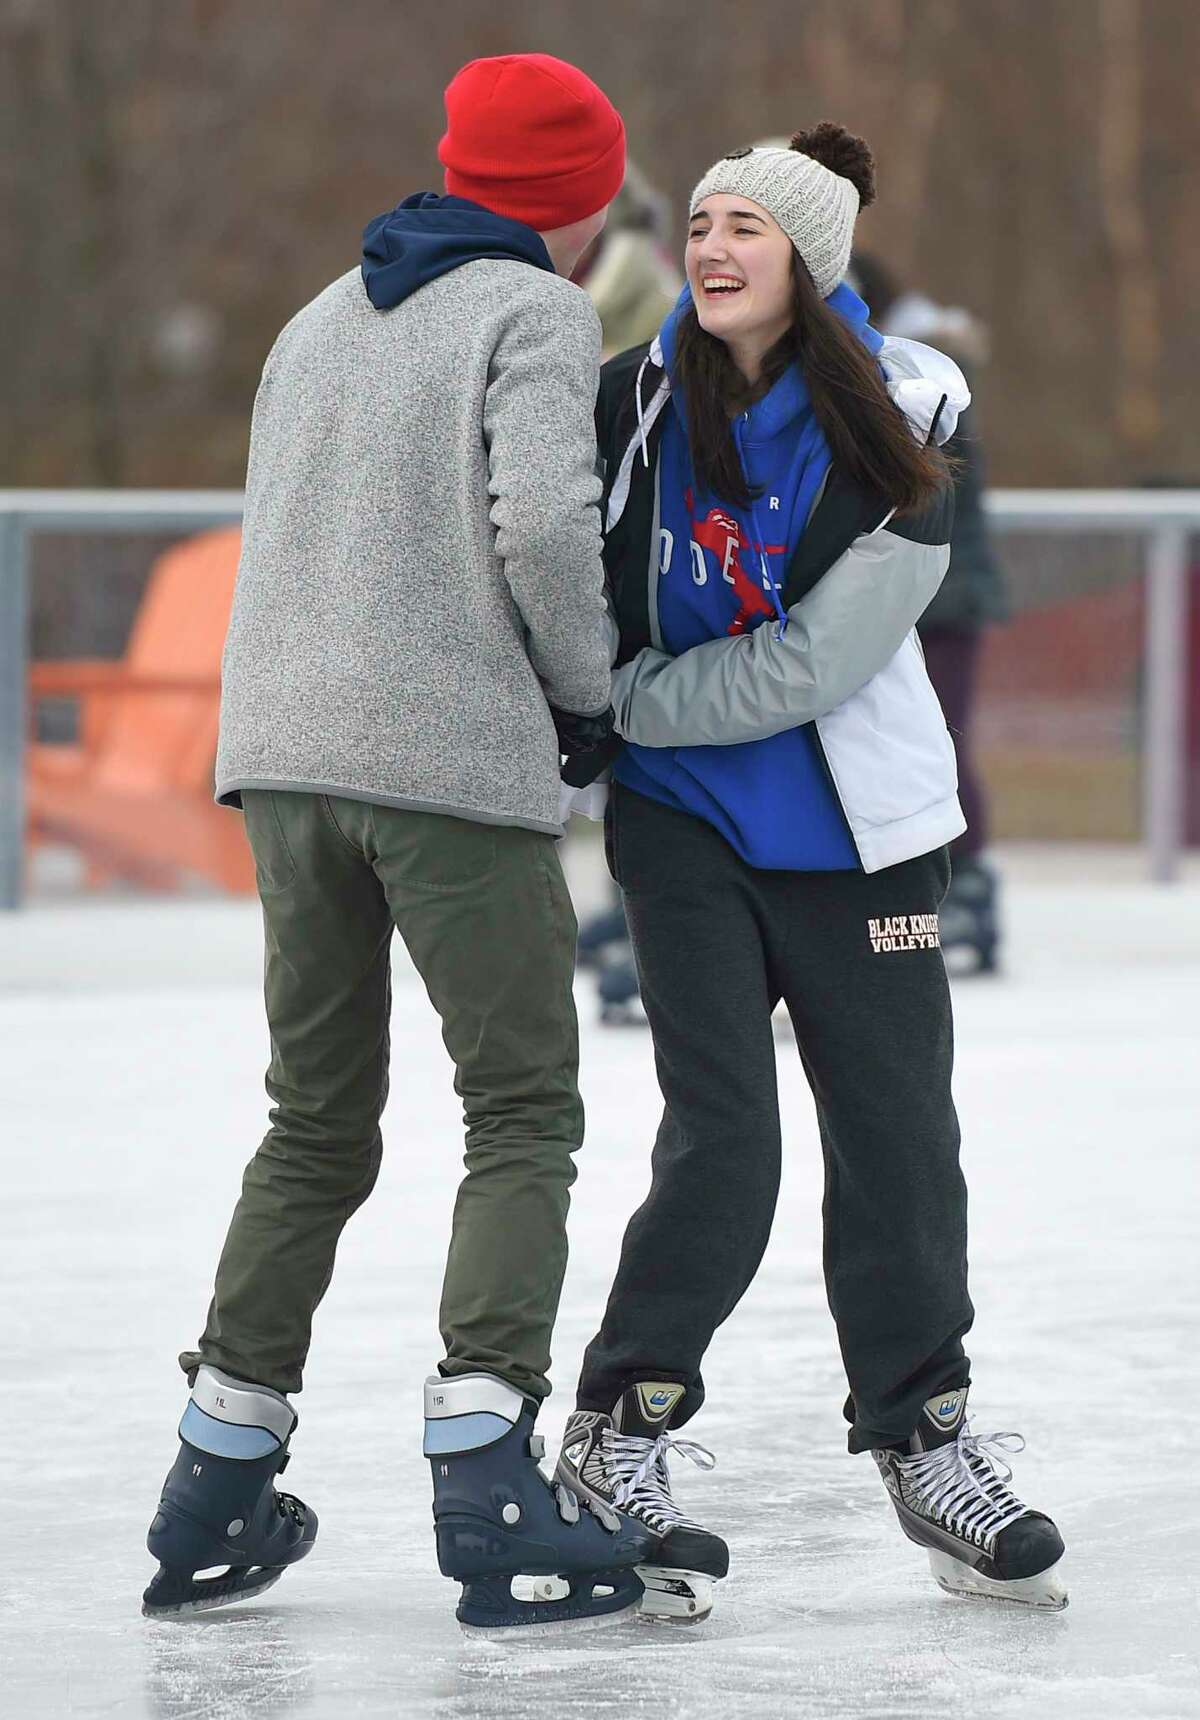 Stamford's Thomas Connolly and Jenna Migliaccio, both 16, skate together at the Steven & Alexandra Cohen Skating Center at Mill River Park in Stamford, Conn. Sunday, Dec. 9, 2018. The new 9,000 sq. ft. skating area opened Thursday and will be open seven days a week seasonally through March 15.